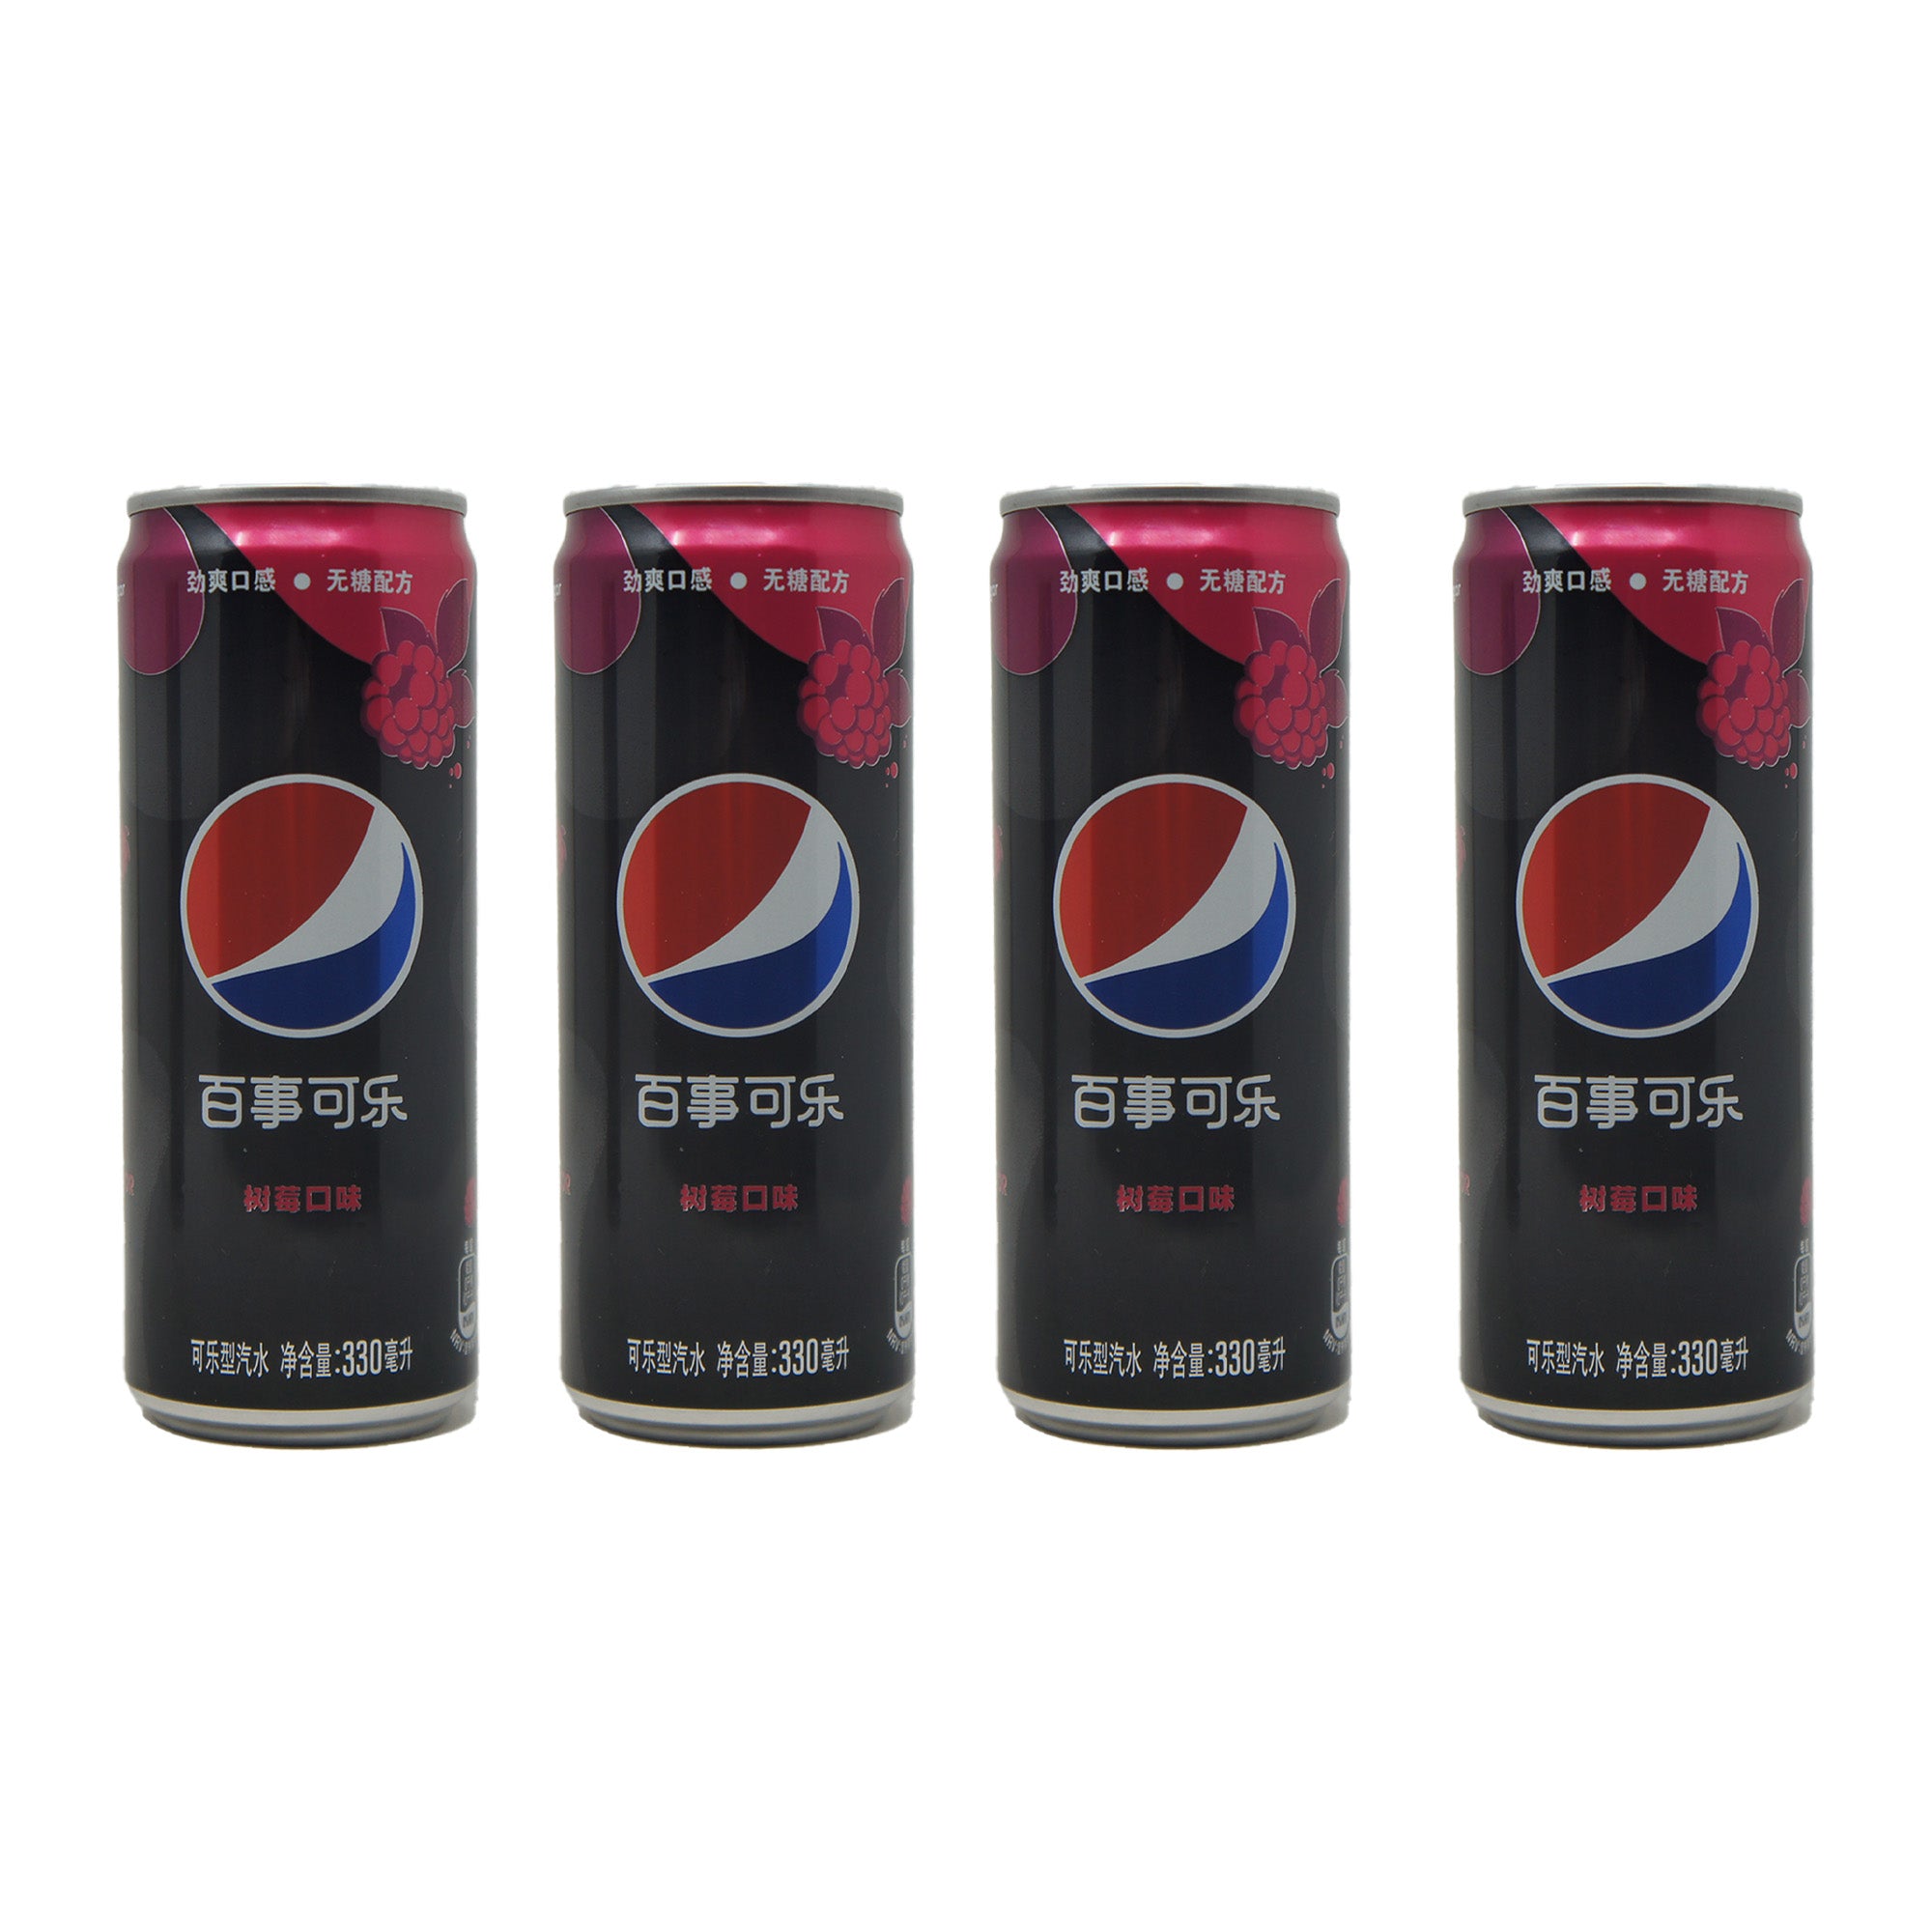 Pepsi Sugar Free, Raspberry Flavored Soda, 330 mL Can, Imported from China (4 Pack)